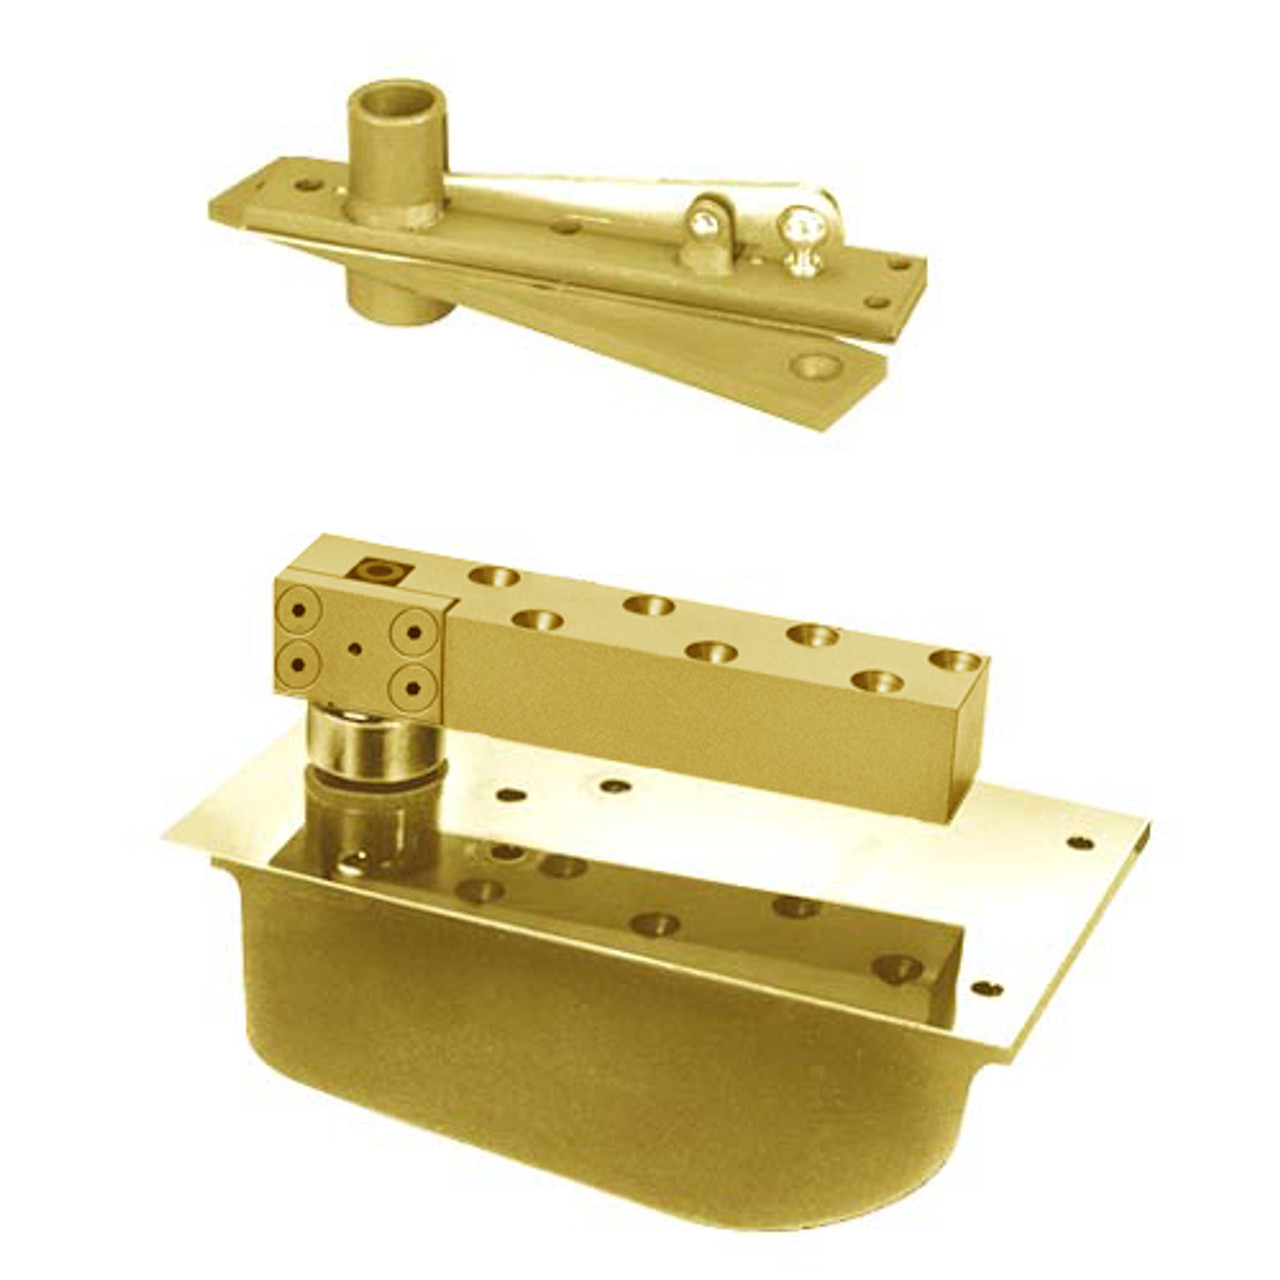 H28-105N-587-RH-605 Rixson 28 Series Extra Heavy Duty Single Acting Center Hung Concealed Floor Closer in Bright Brass Finish